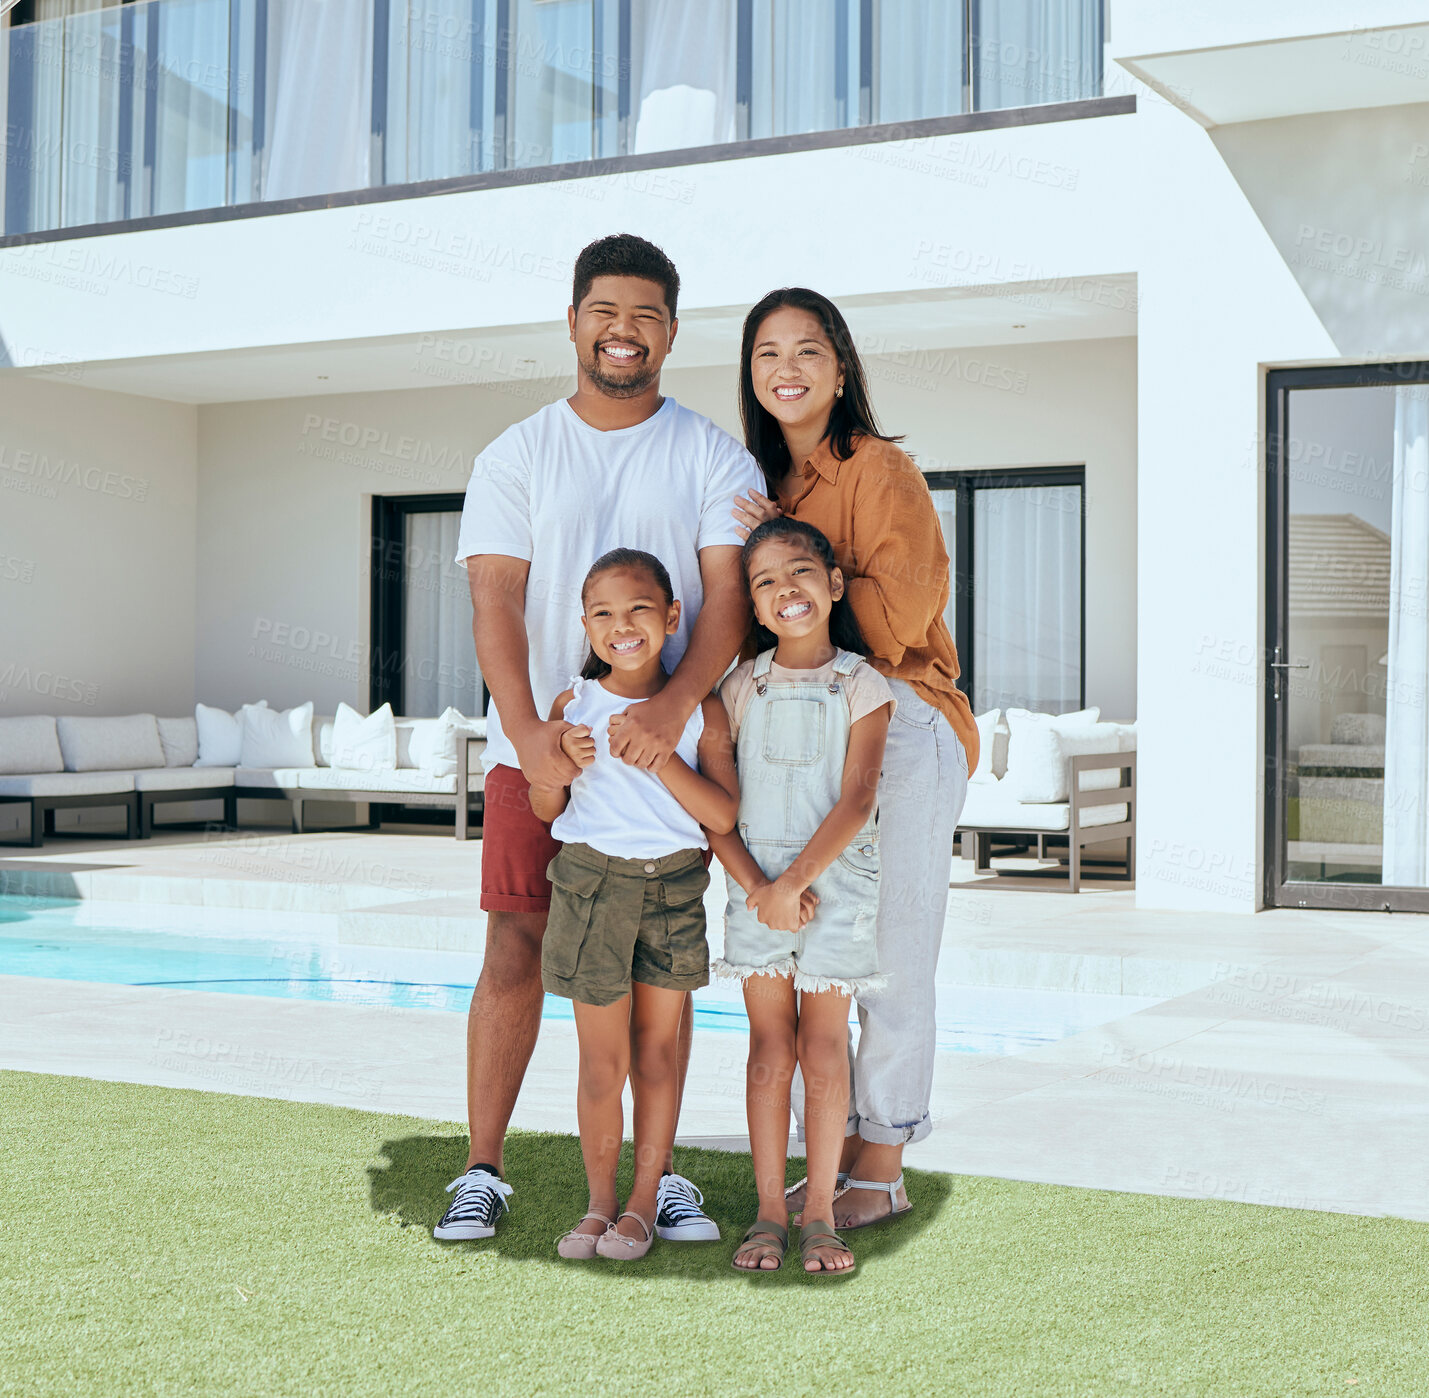 Buy stock photo Real estate, new home and happy family portrait outdoor grass of luxury house, dream building or mortgage finance in Asia. Parents, kids and family home loan of property investment in neighborhood 